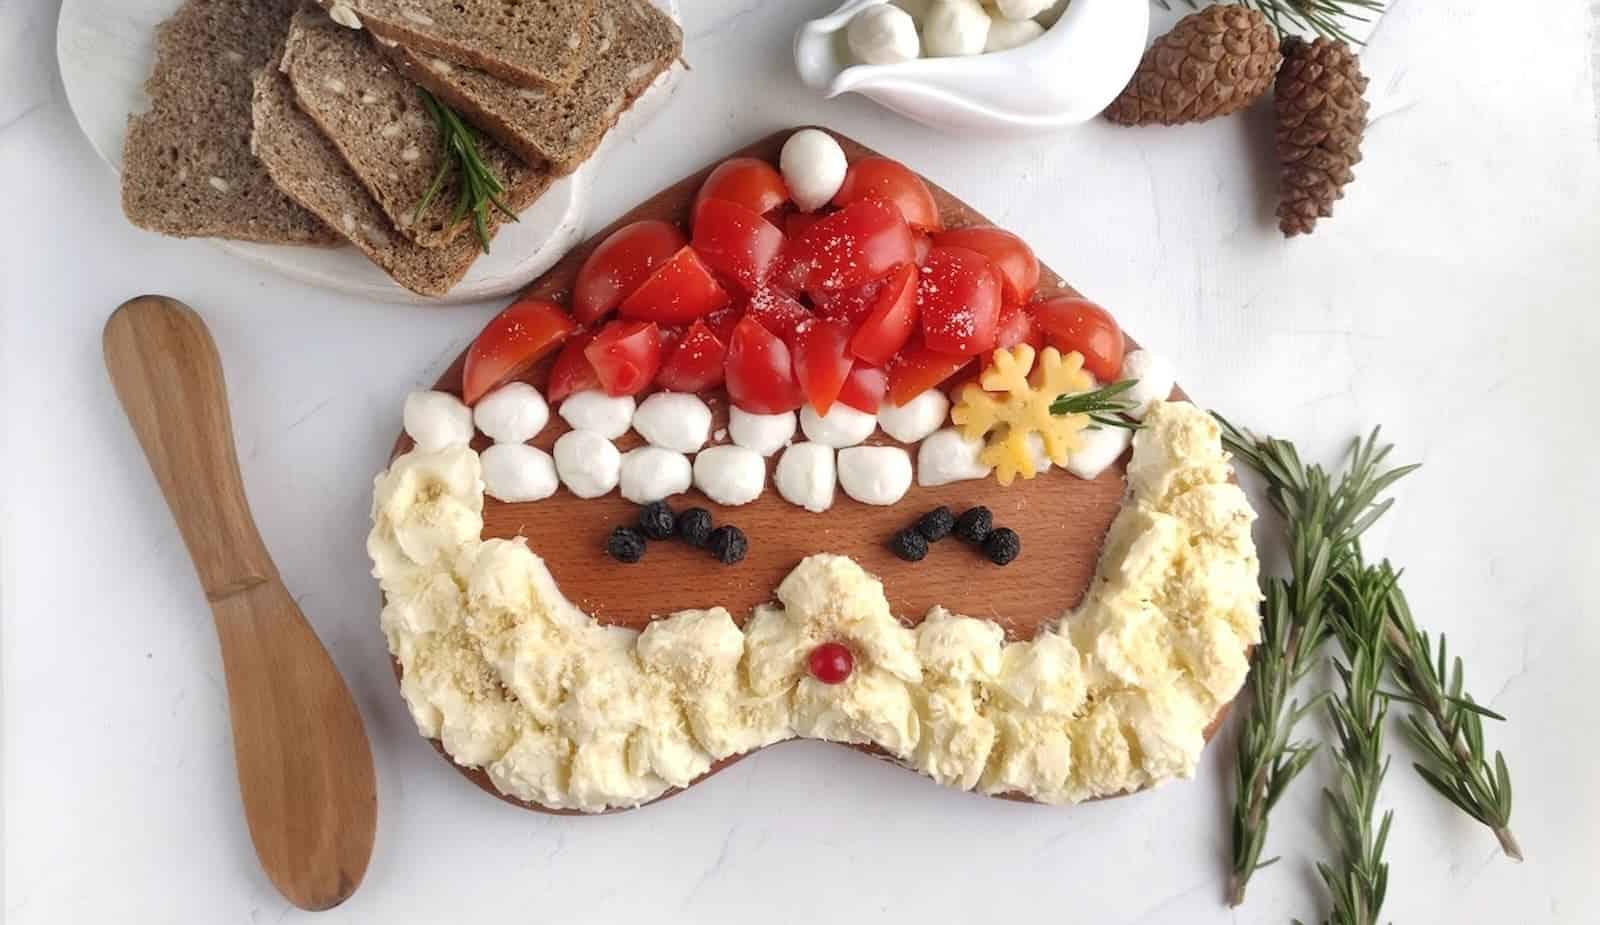 A Santa shaped Christmas butter board with rosemary sprigs and bread.